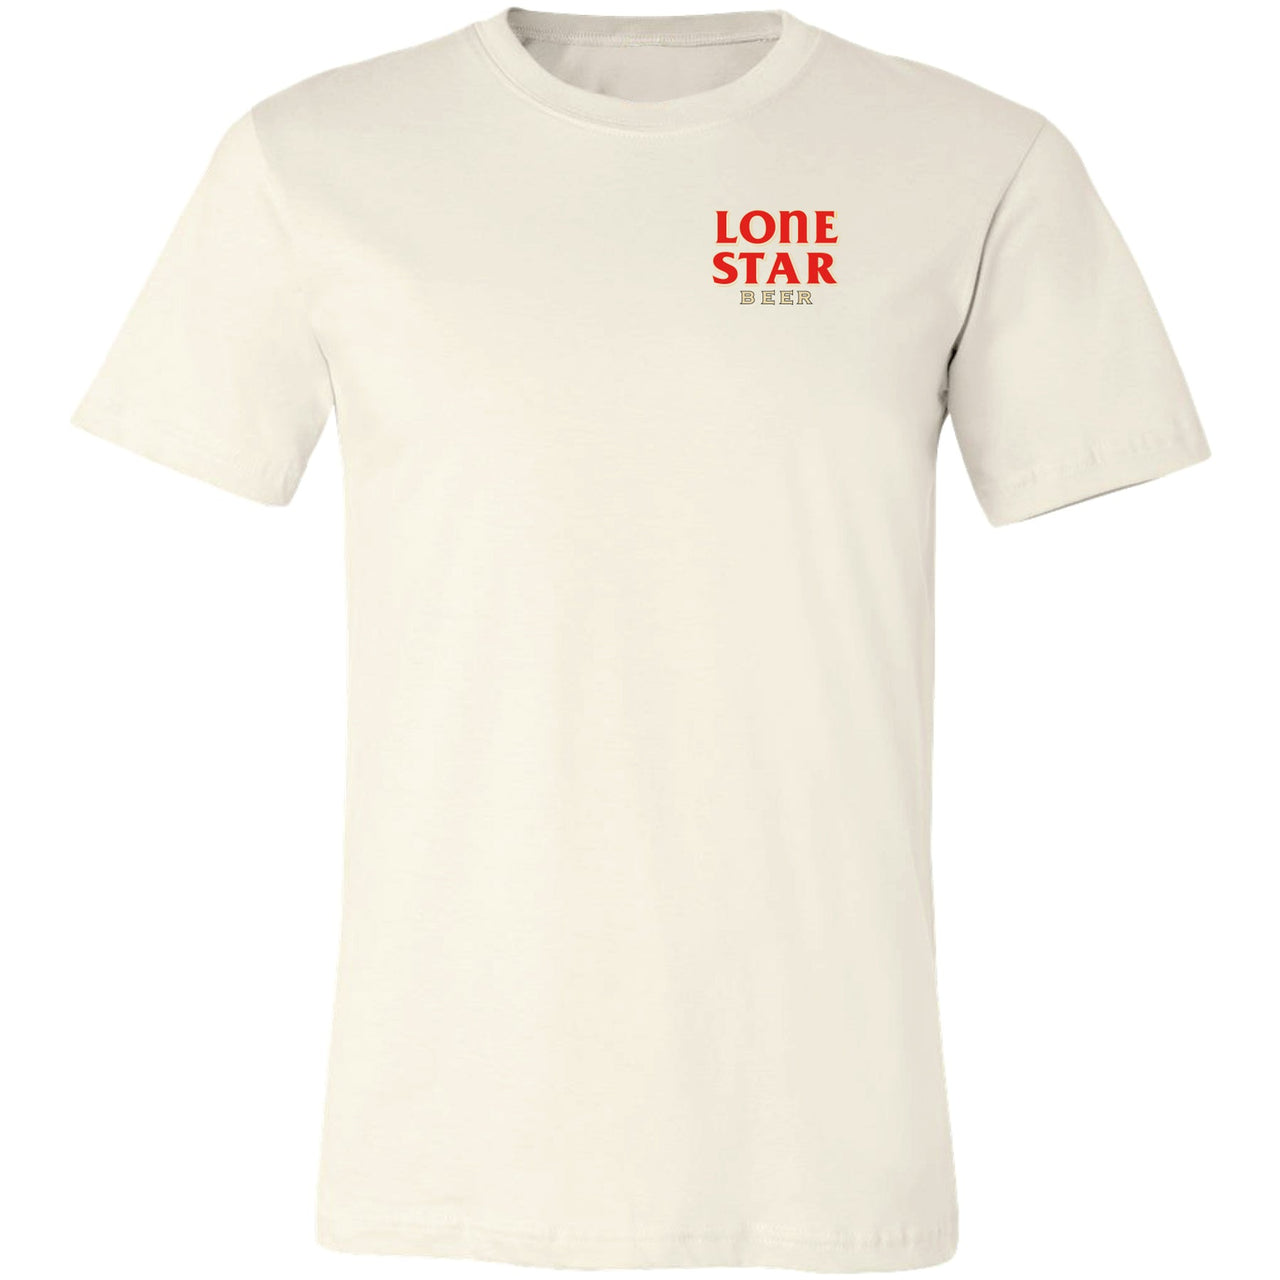 Lone Star - Vintage Sign 2-Sided T-shirt